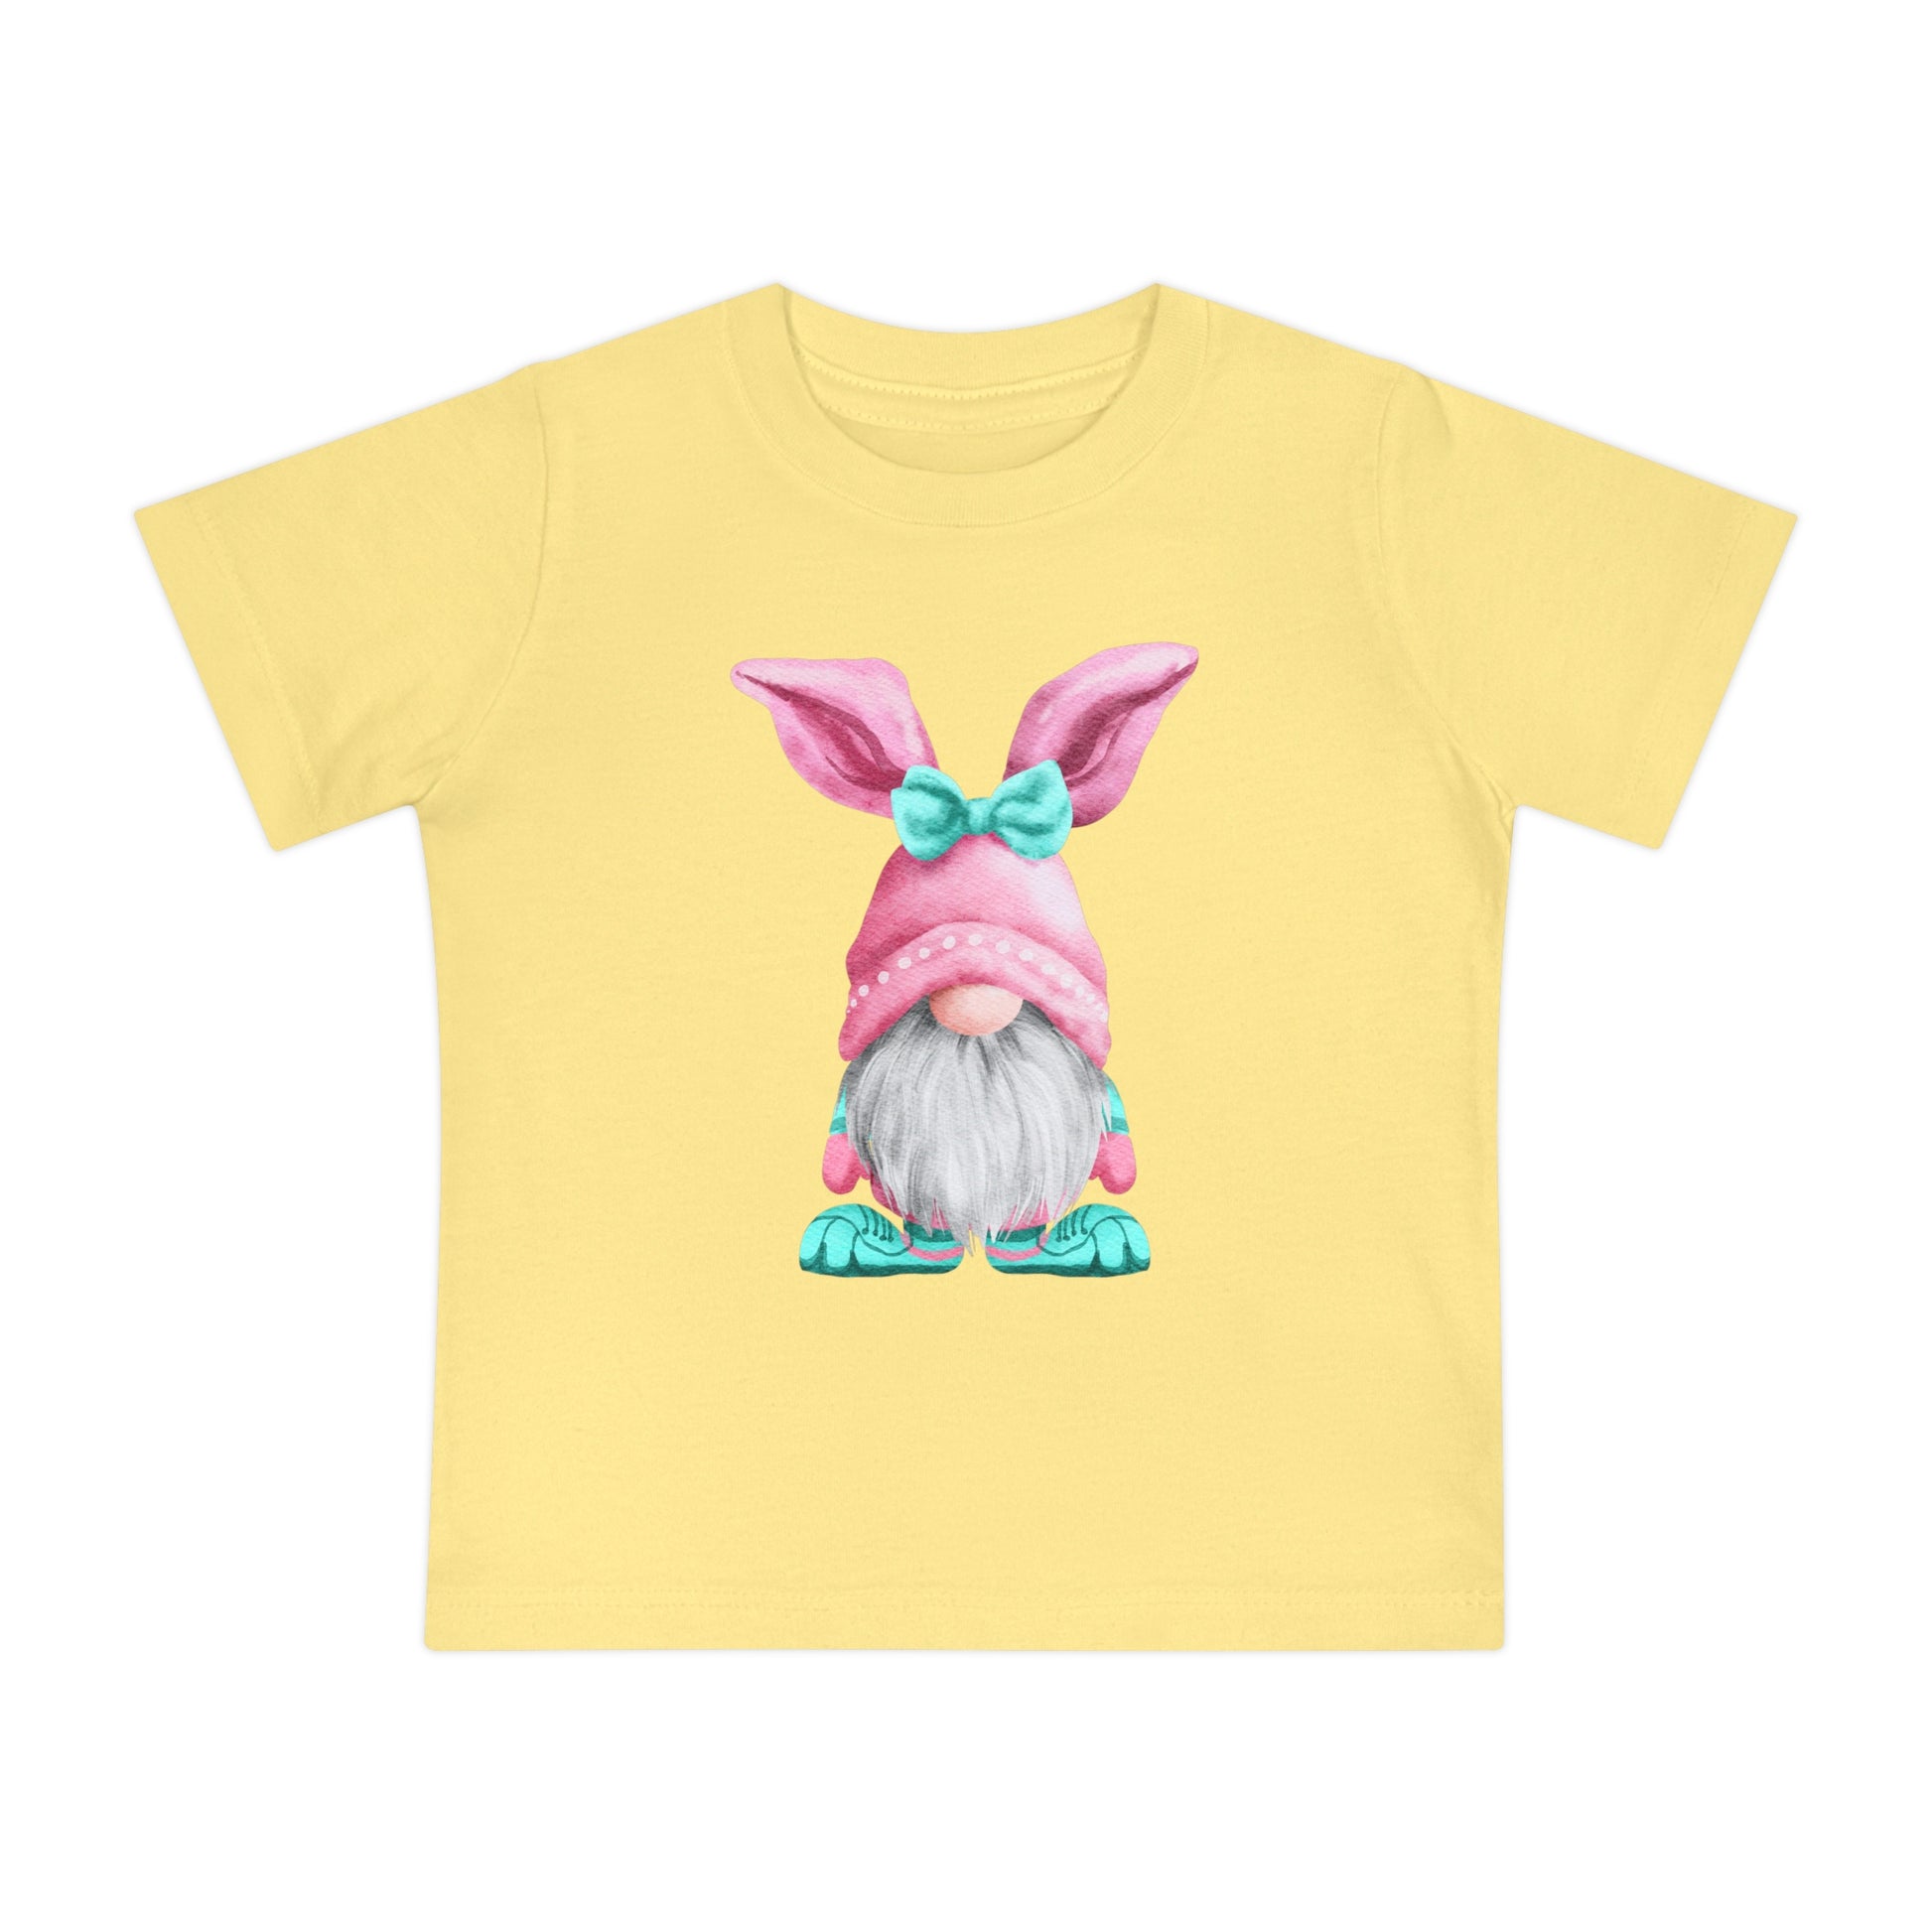 Yellow Baby's Easter-Gnome T-shirt featuring a whimsical print of a gnome wearing a pink bunny hat, designed as a unisex crew neck tee by Printify.